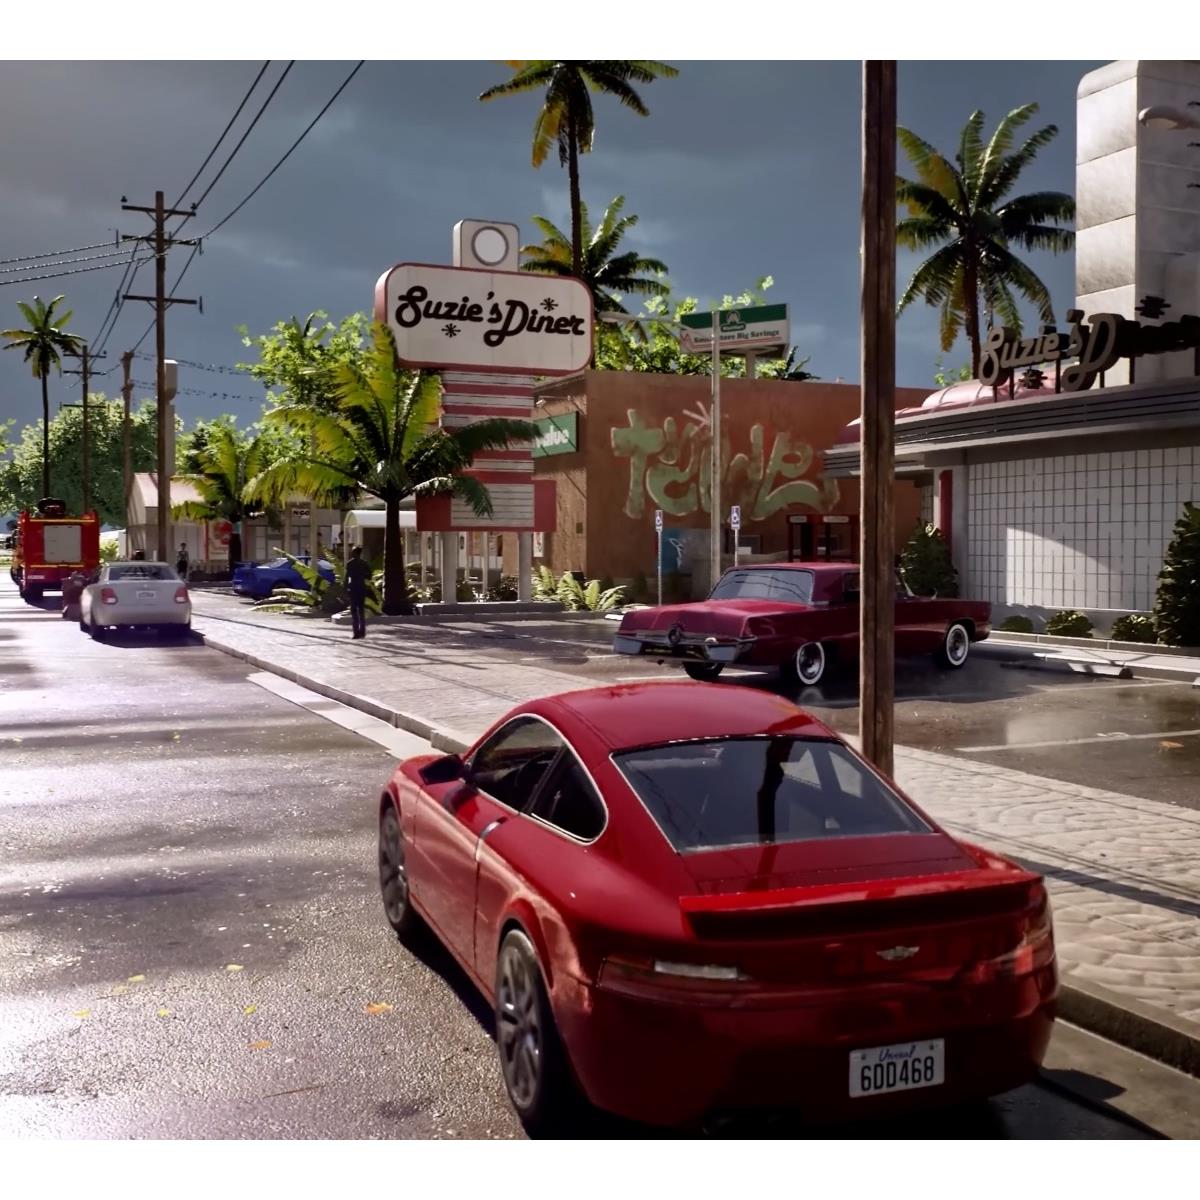 The GTA 6 trailer is great — but for this hardcore series fan, returning to  Vice City feels like a mistake